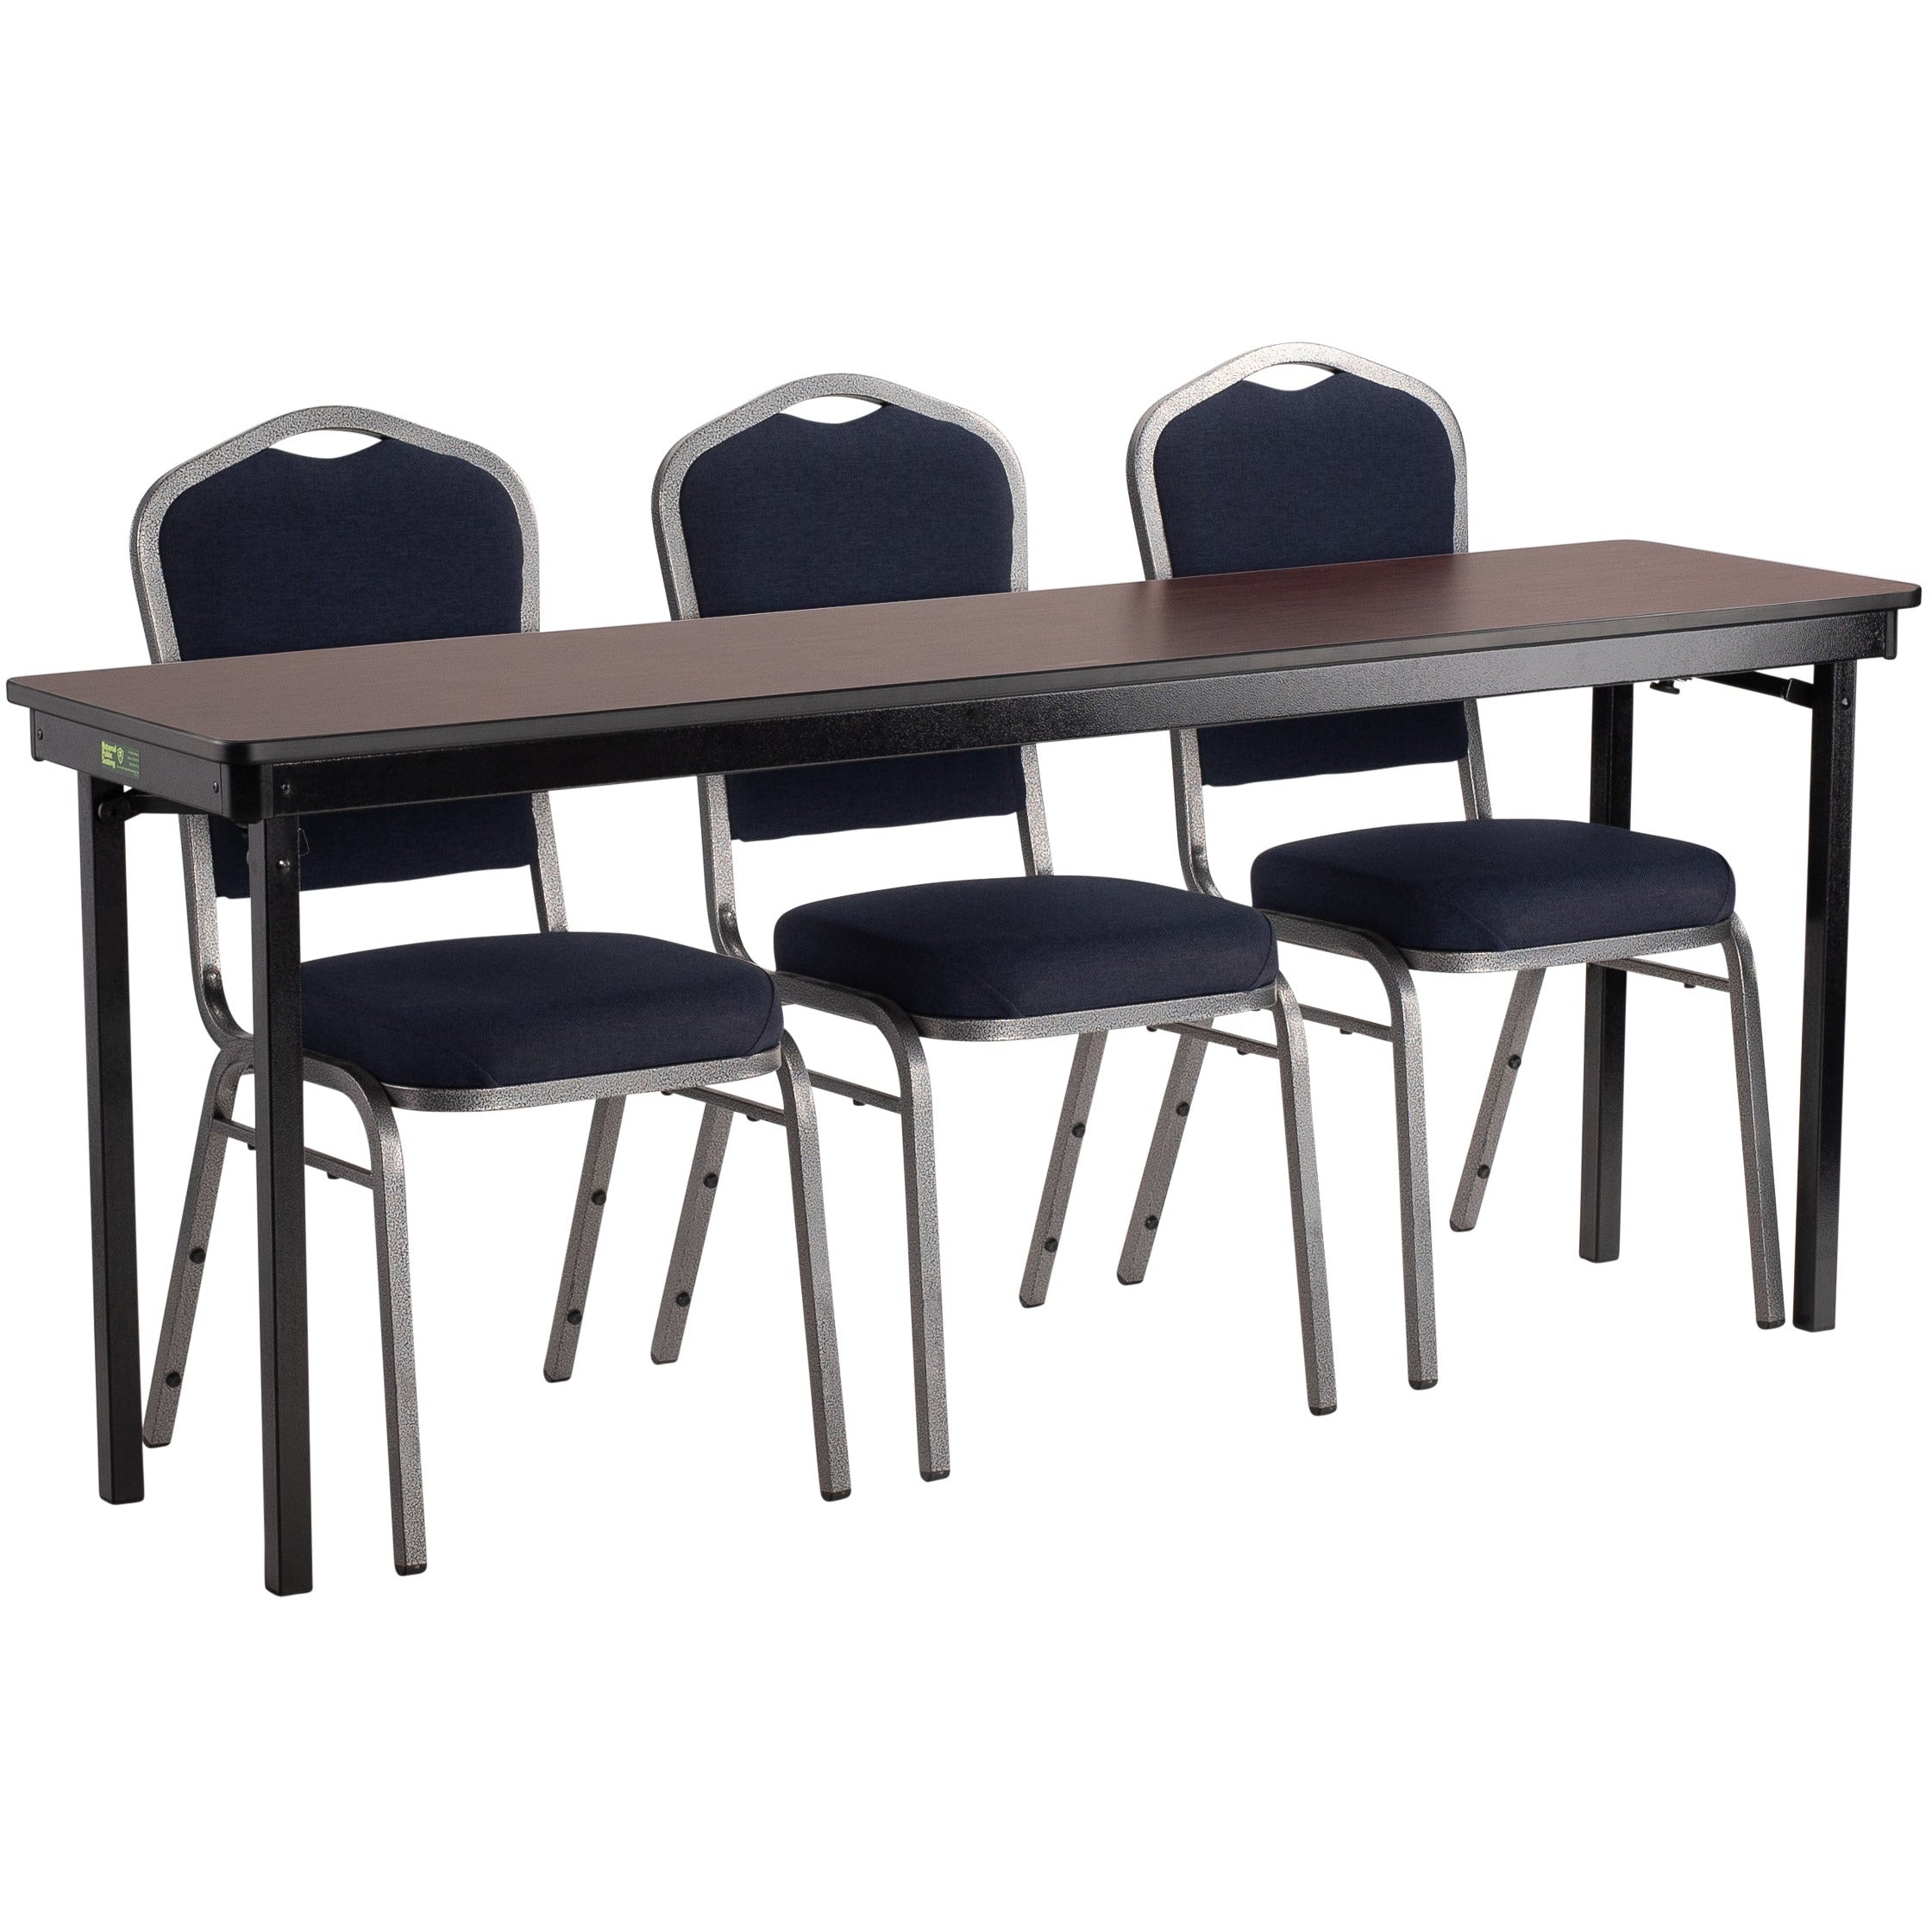 24" x 96" Max Seating Folding Table, MDF Core/ProtcectEdge Banding